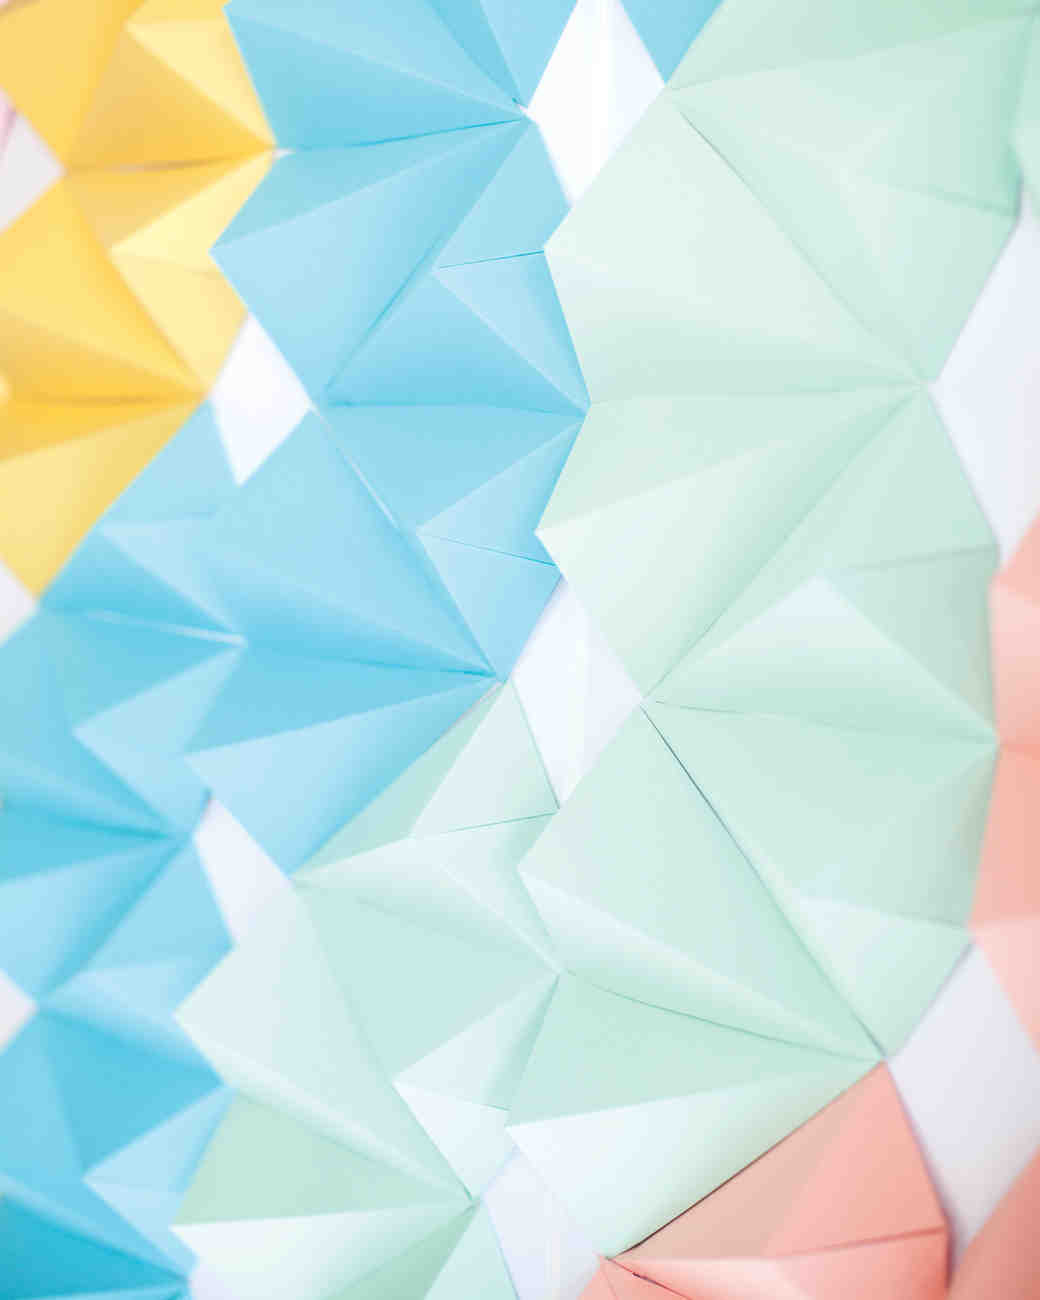 20 Geometric Wedding Ideas That Are Anything But Square | Martha ...